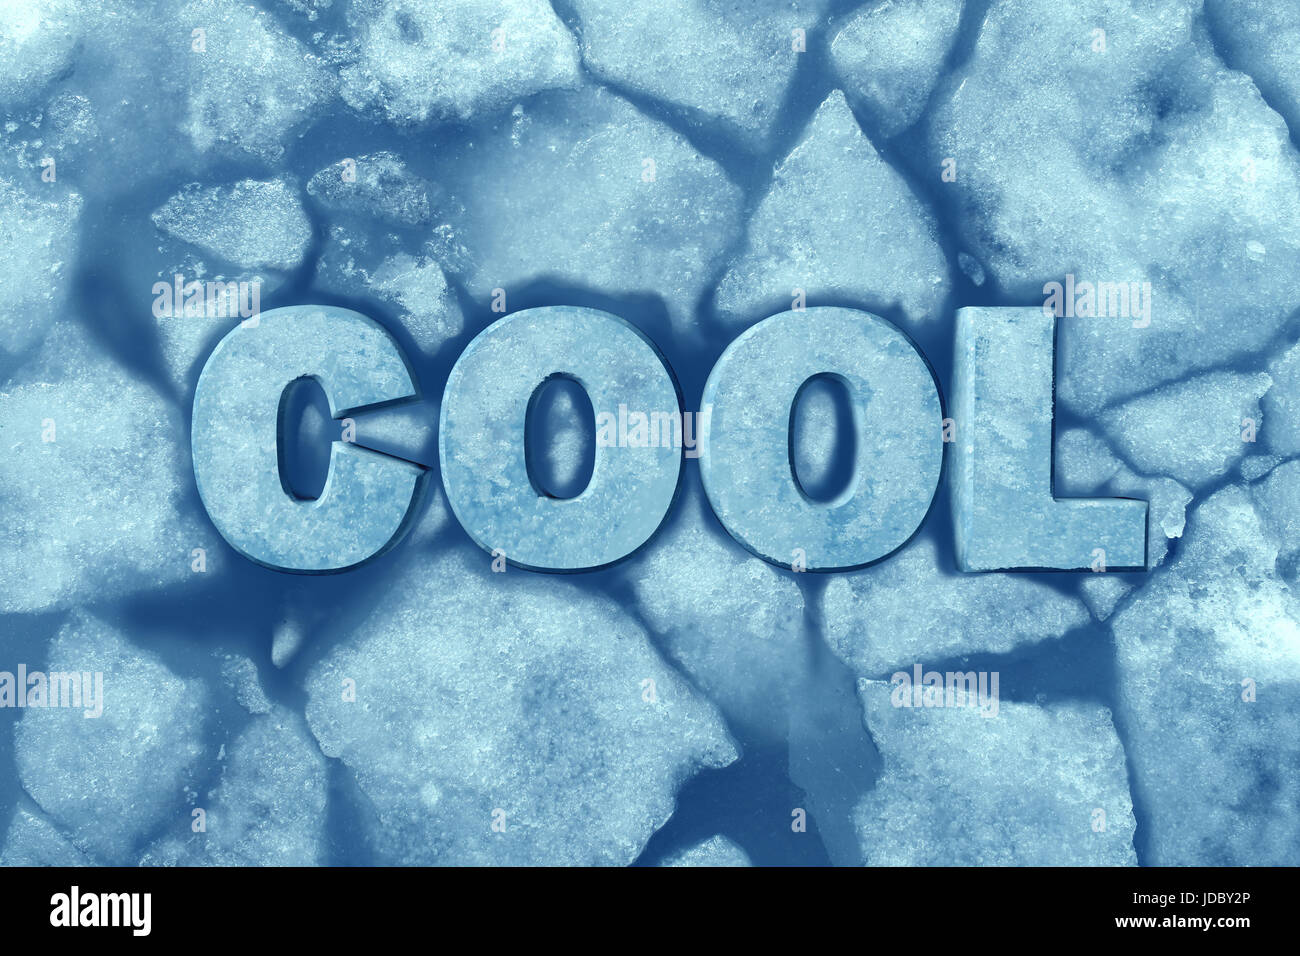 Cool ice symbol as text in frosty glacial frozen water as a refrigeration and air conditioning comfort symbol with 3D illustration elements. Stock Photo